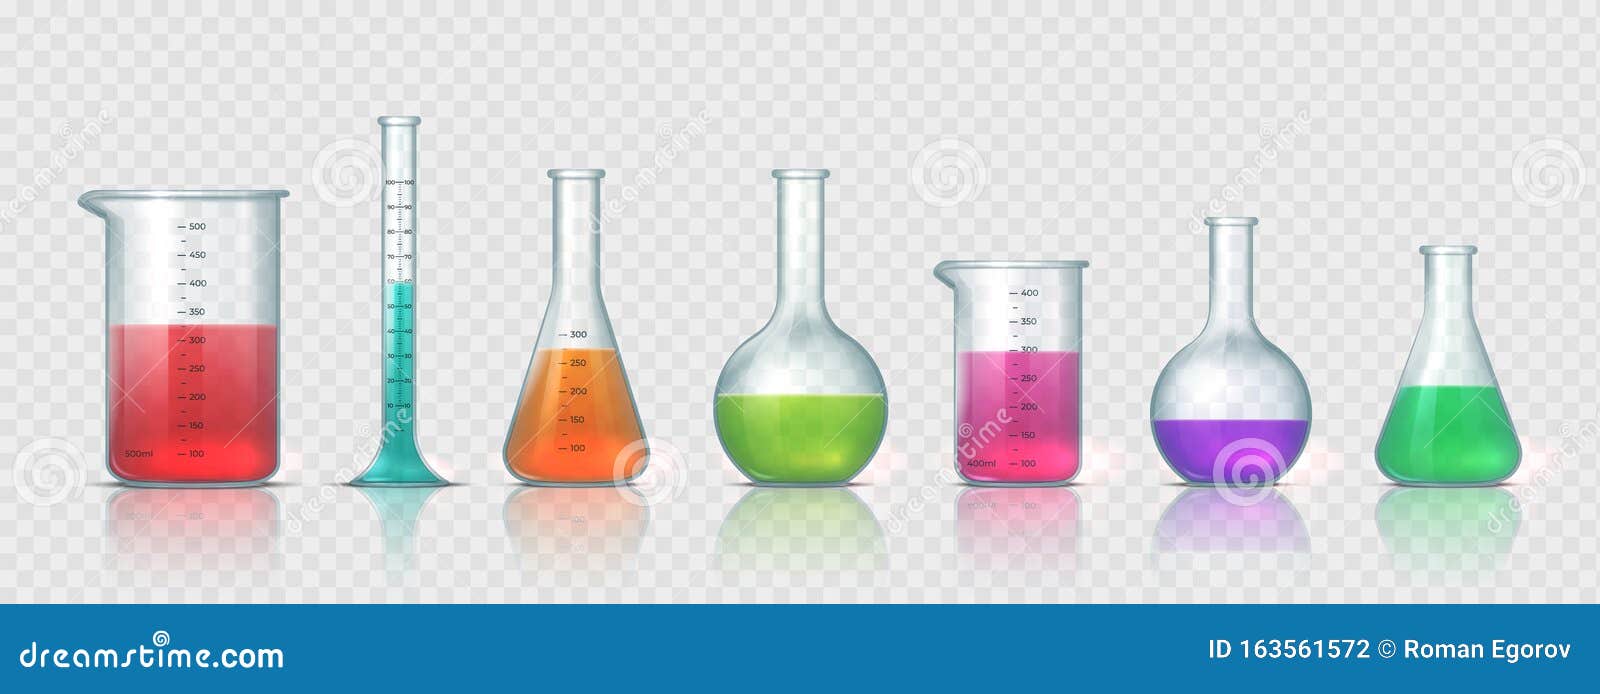 laboratory equipment. realistic 3d glass tubes, flask, beaker and other chemical and medicine lab measuring equipment